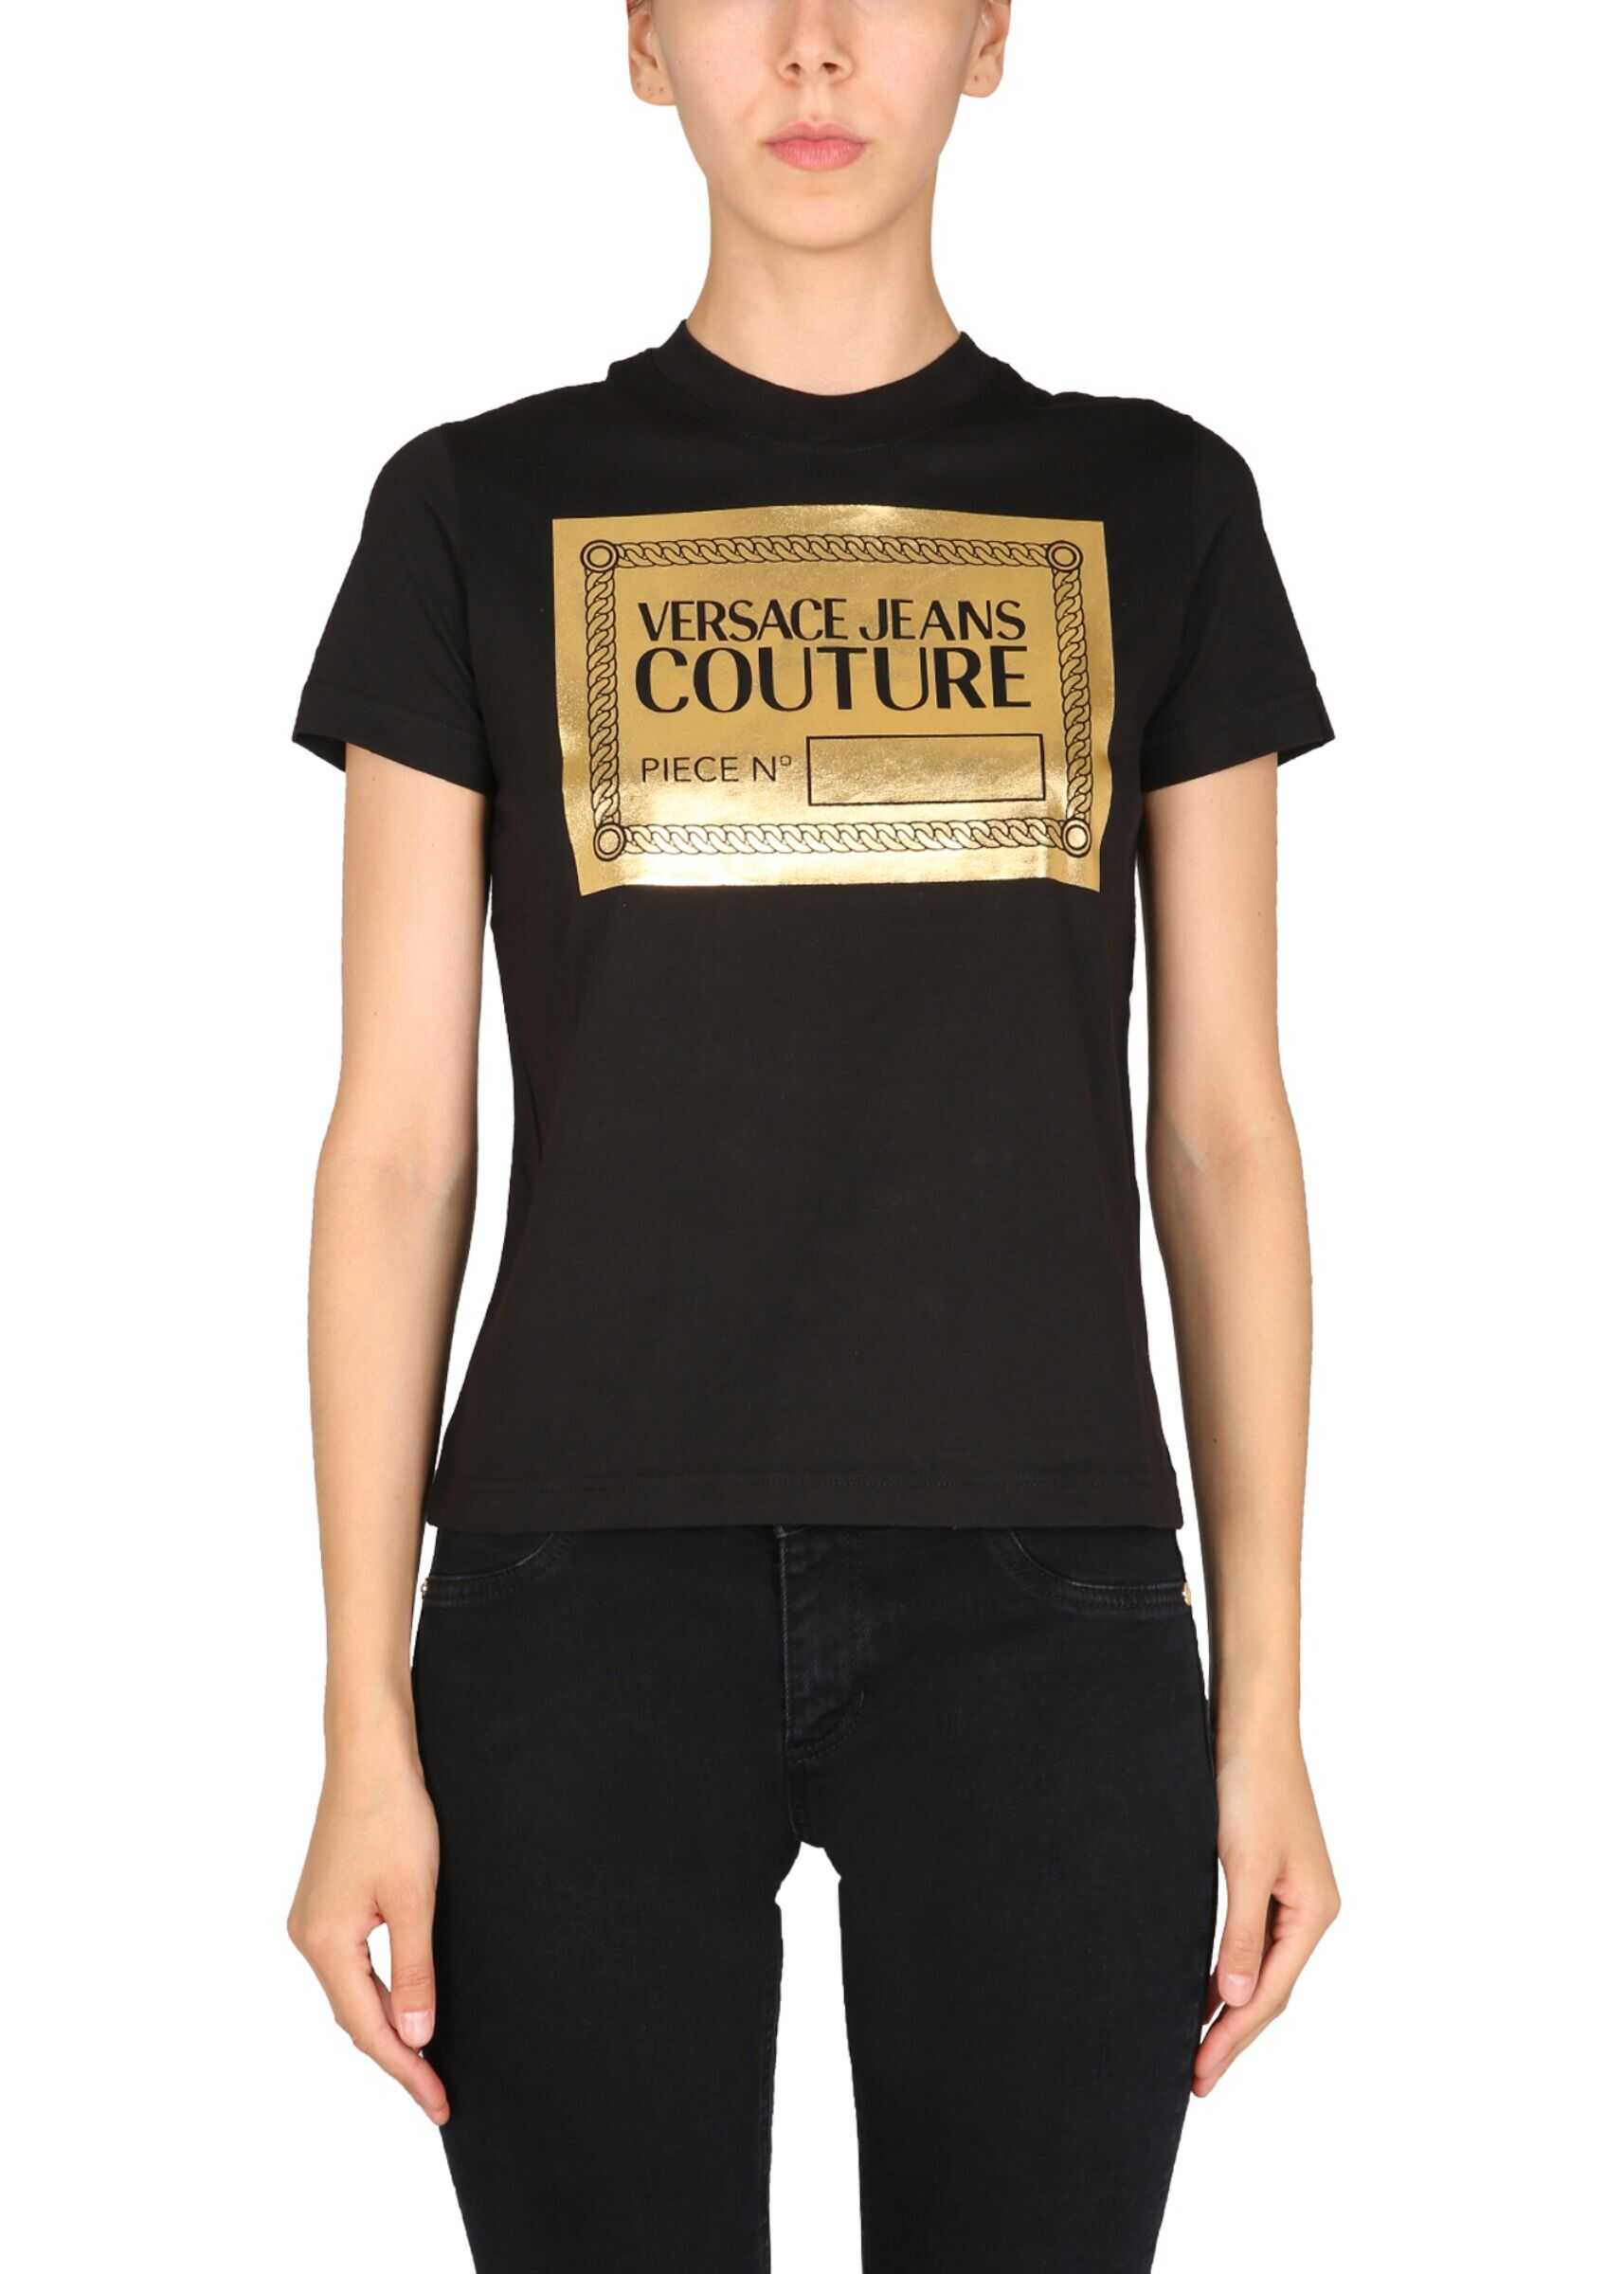 Versace Jeans Couture T-Shirt With Laminated Logo 71HAHT14_CJ00TG89 BLACK